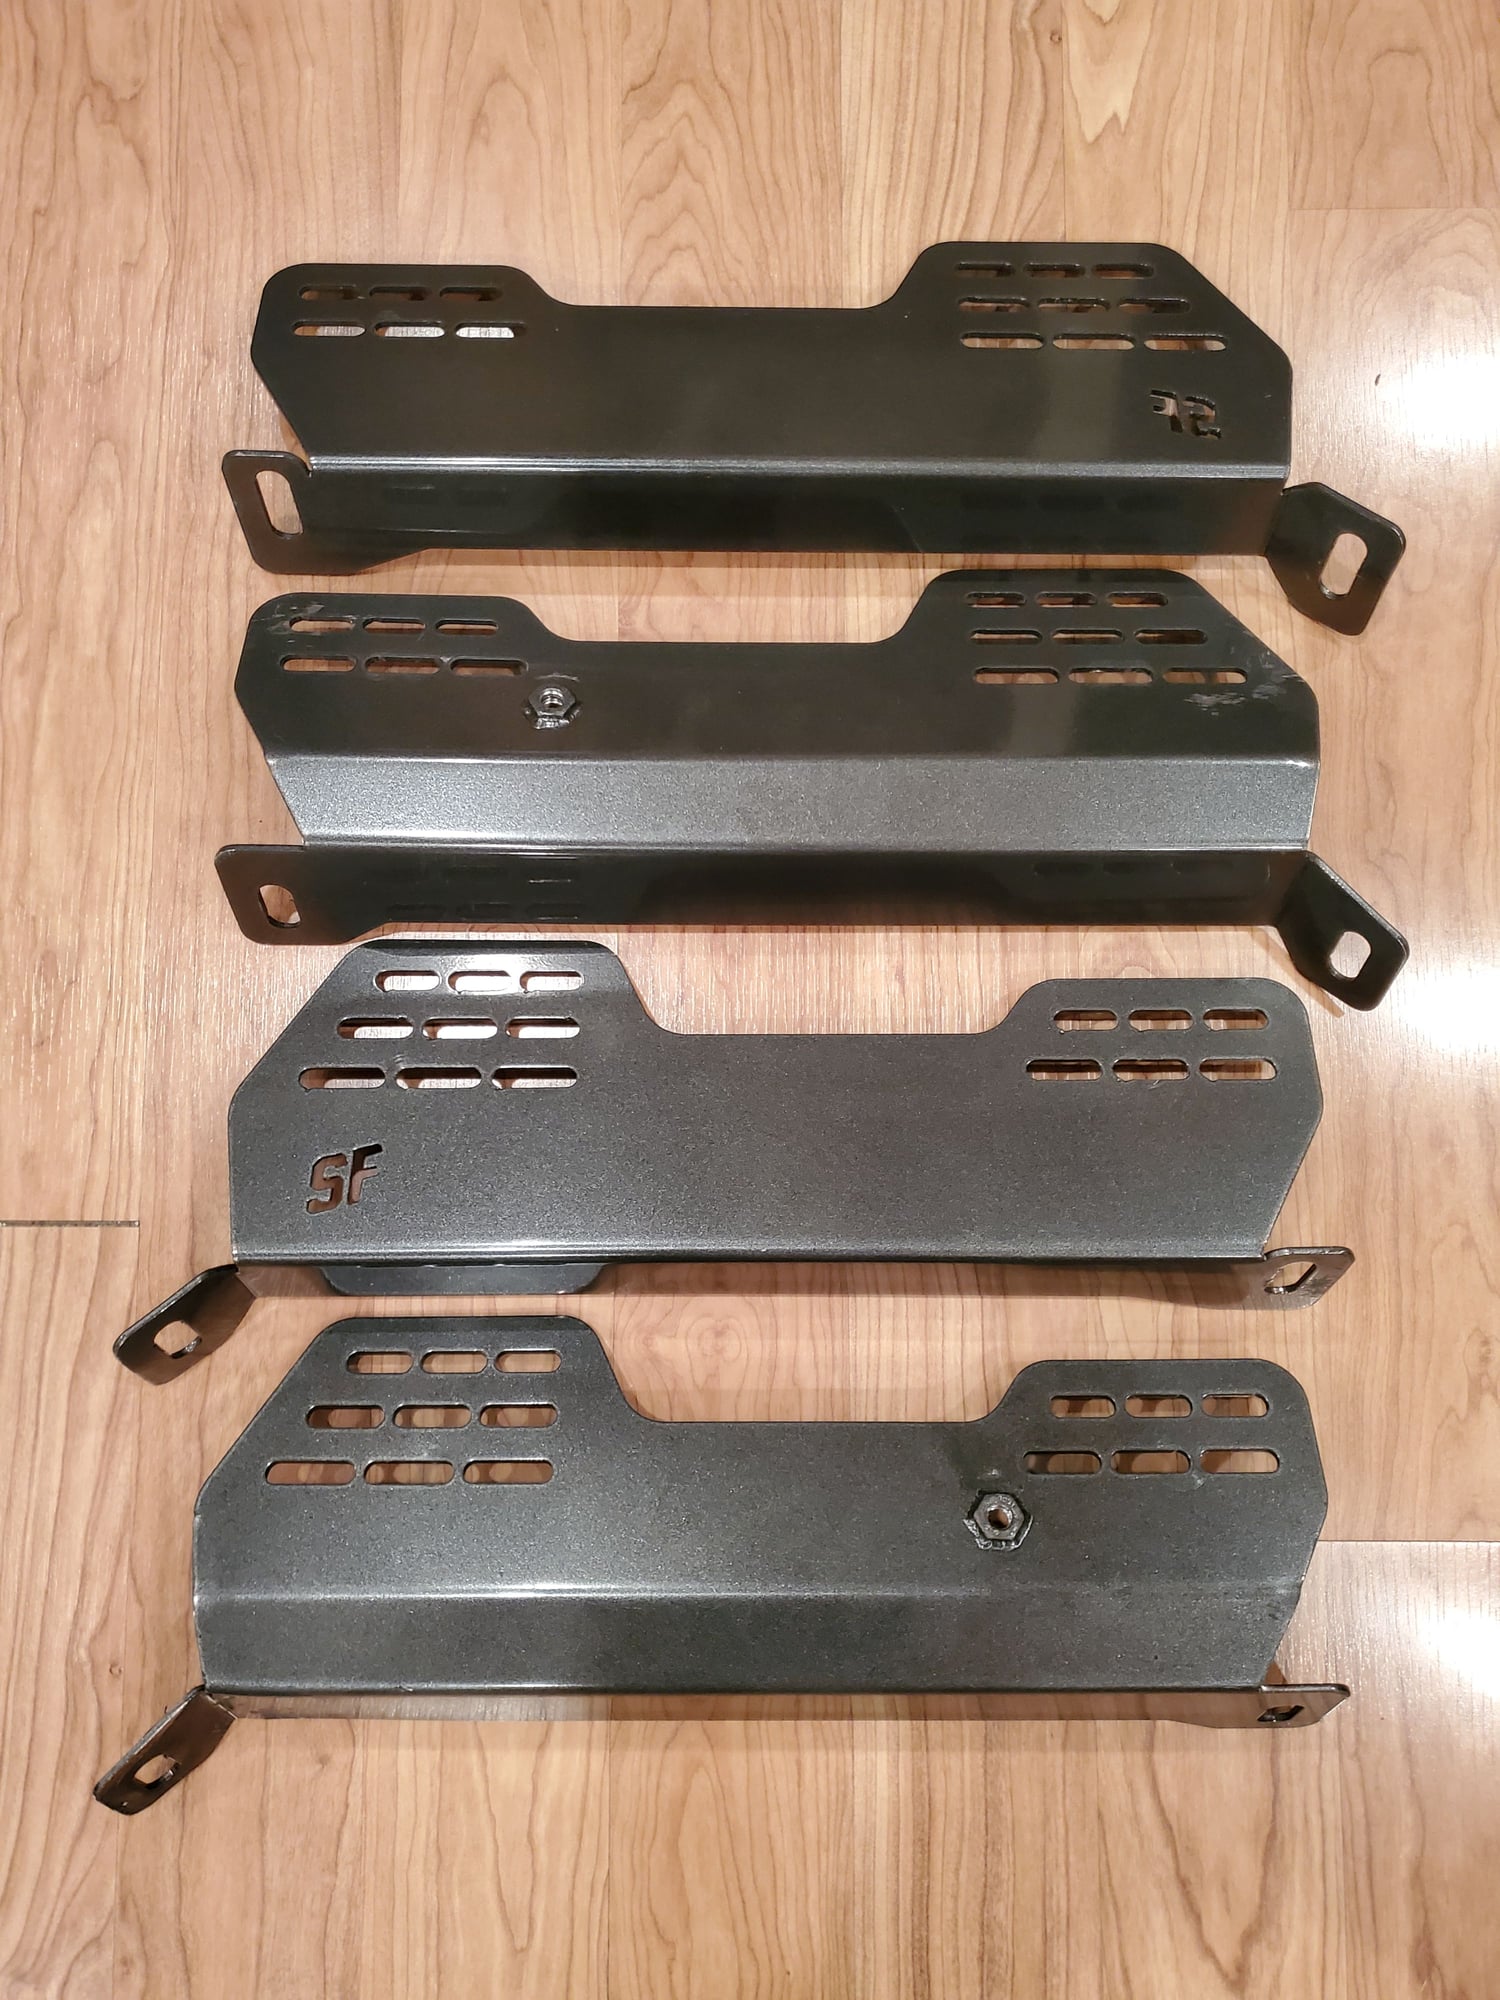 Interior/Upholstery - Street Faction Seat Brackets - Alibaba RHD Carbon Dash Panels - Used - 1992 to 2002 Mazda RX-7 - Annapolis, MD 21401, United States